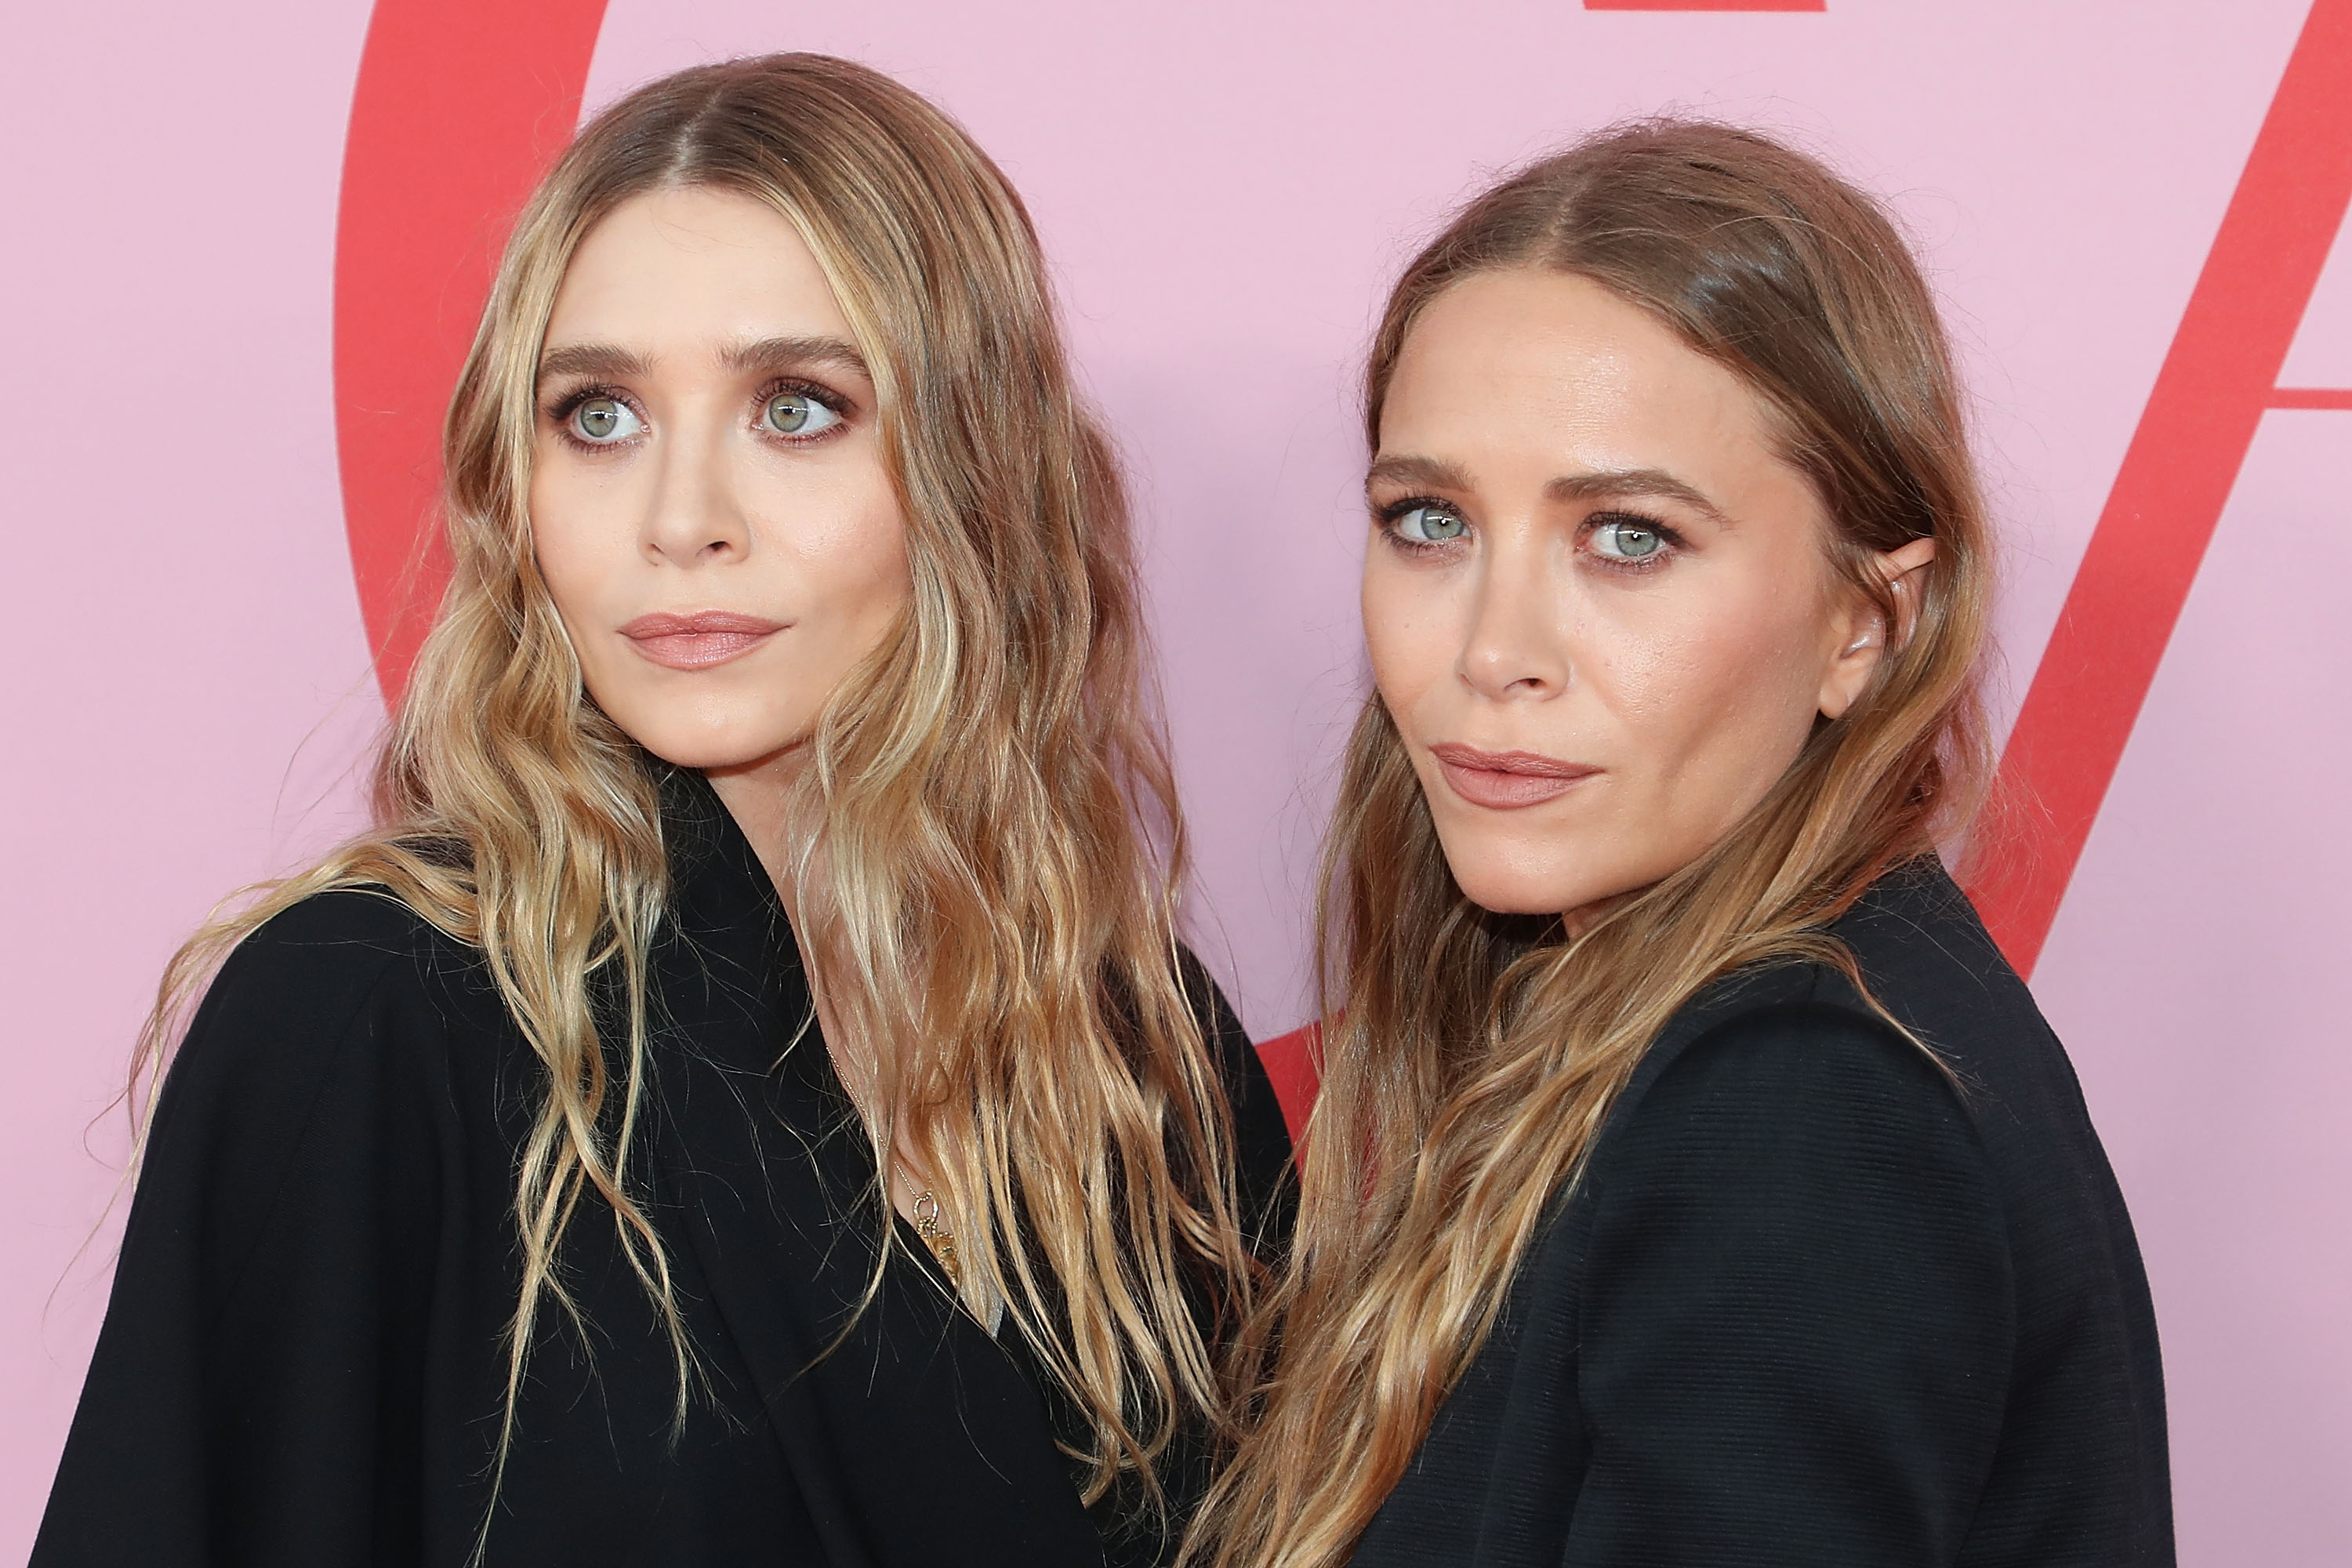 Olsen Twins Naked Beach - The Olsen Twins at the 2019 CFDA Fashion Awards: See Pics!